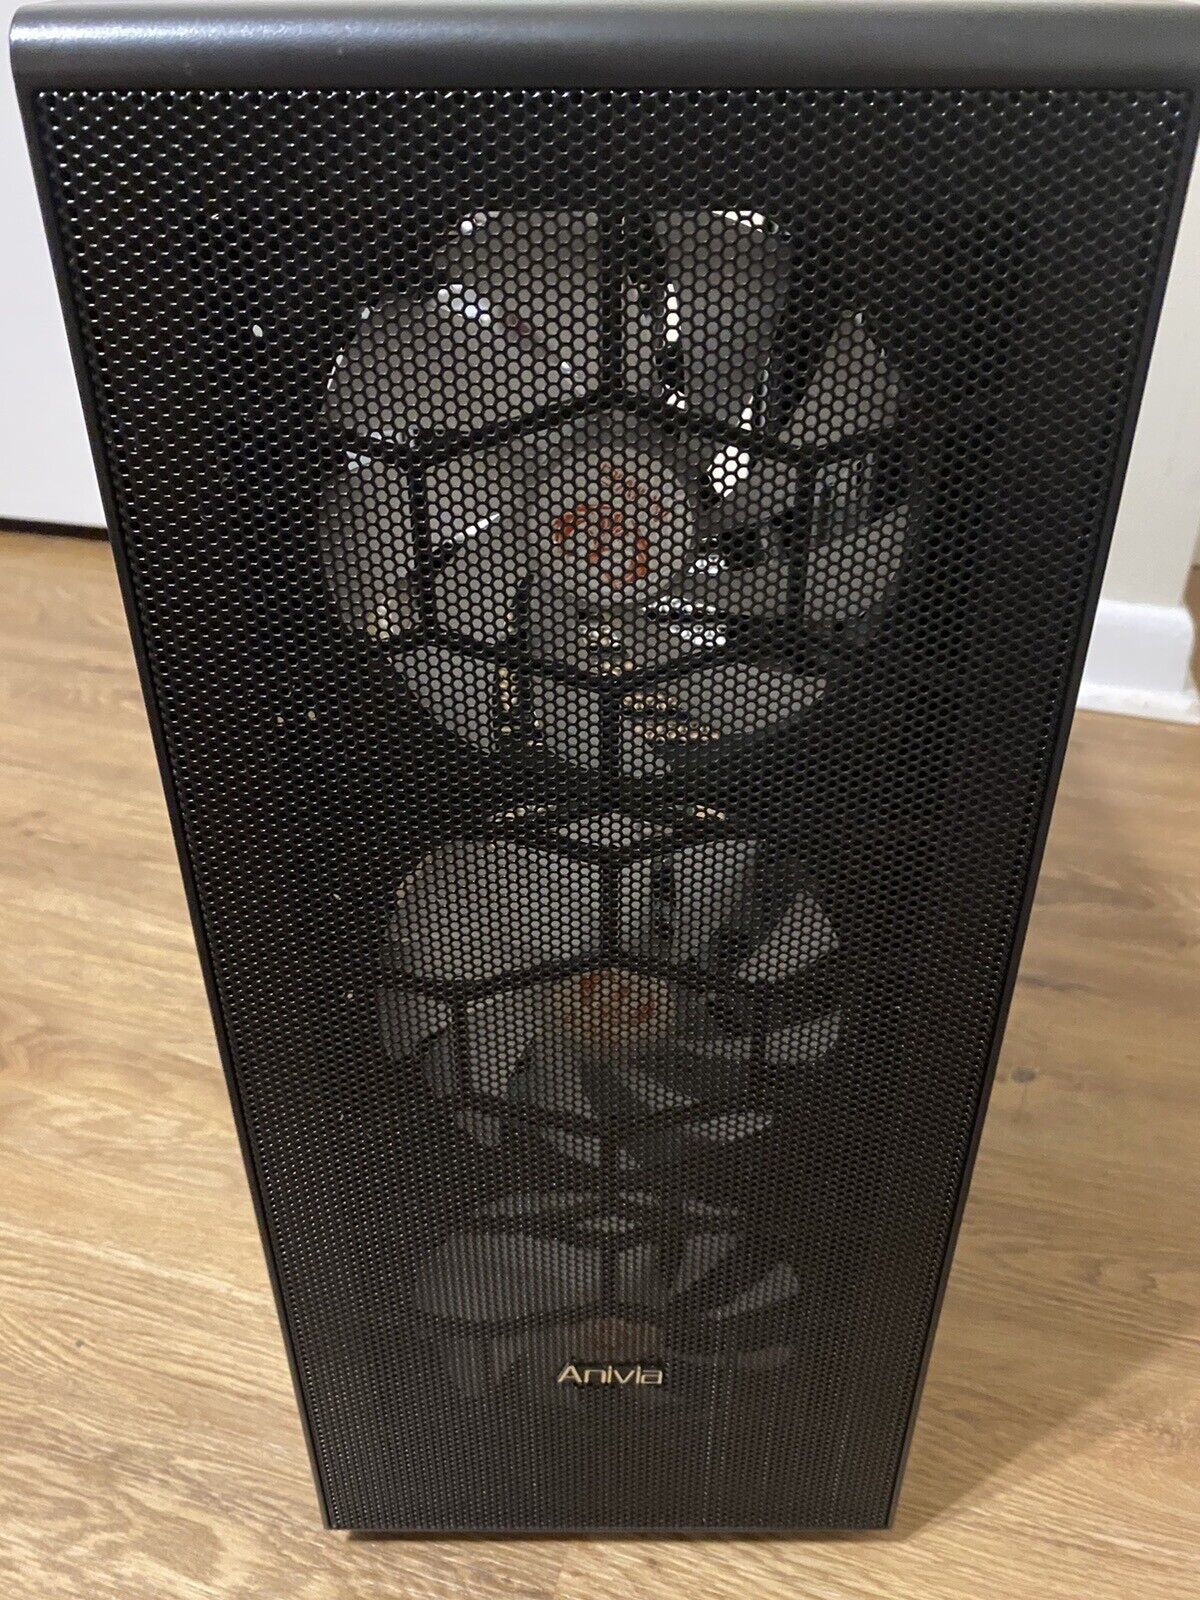 Anivia Pc Case With Fans, G-Lab Mouse And Keyboard